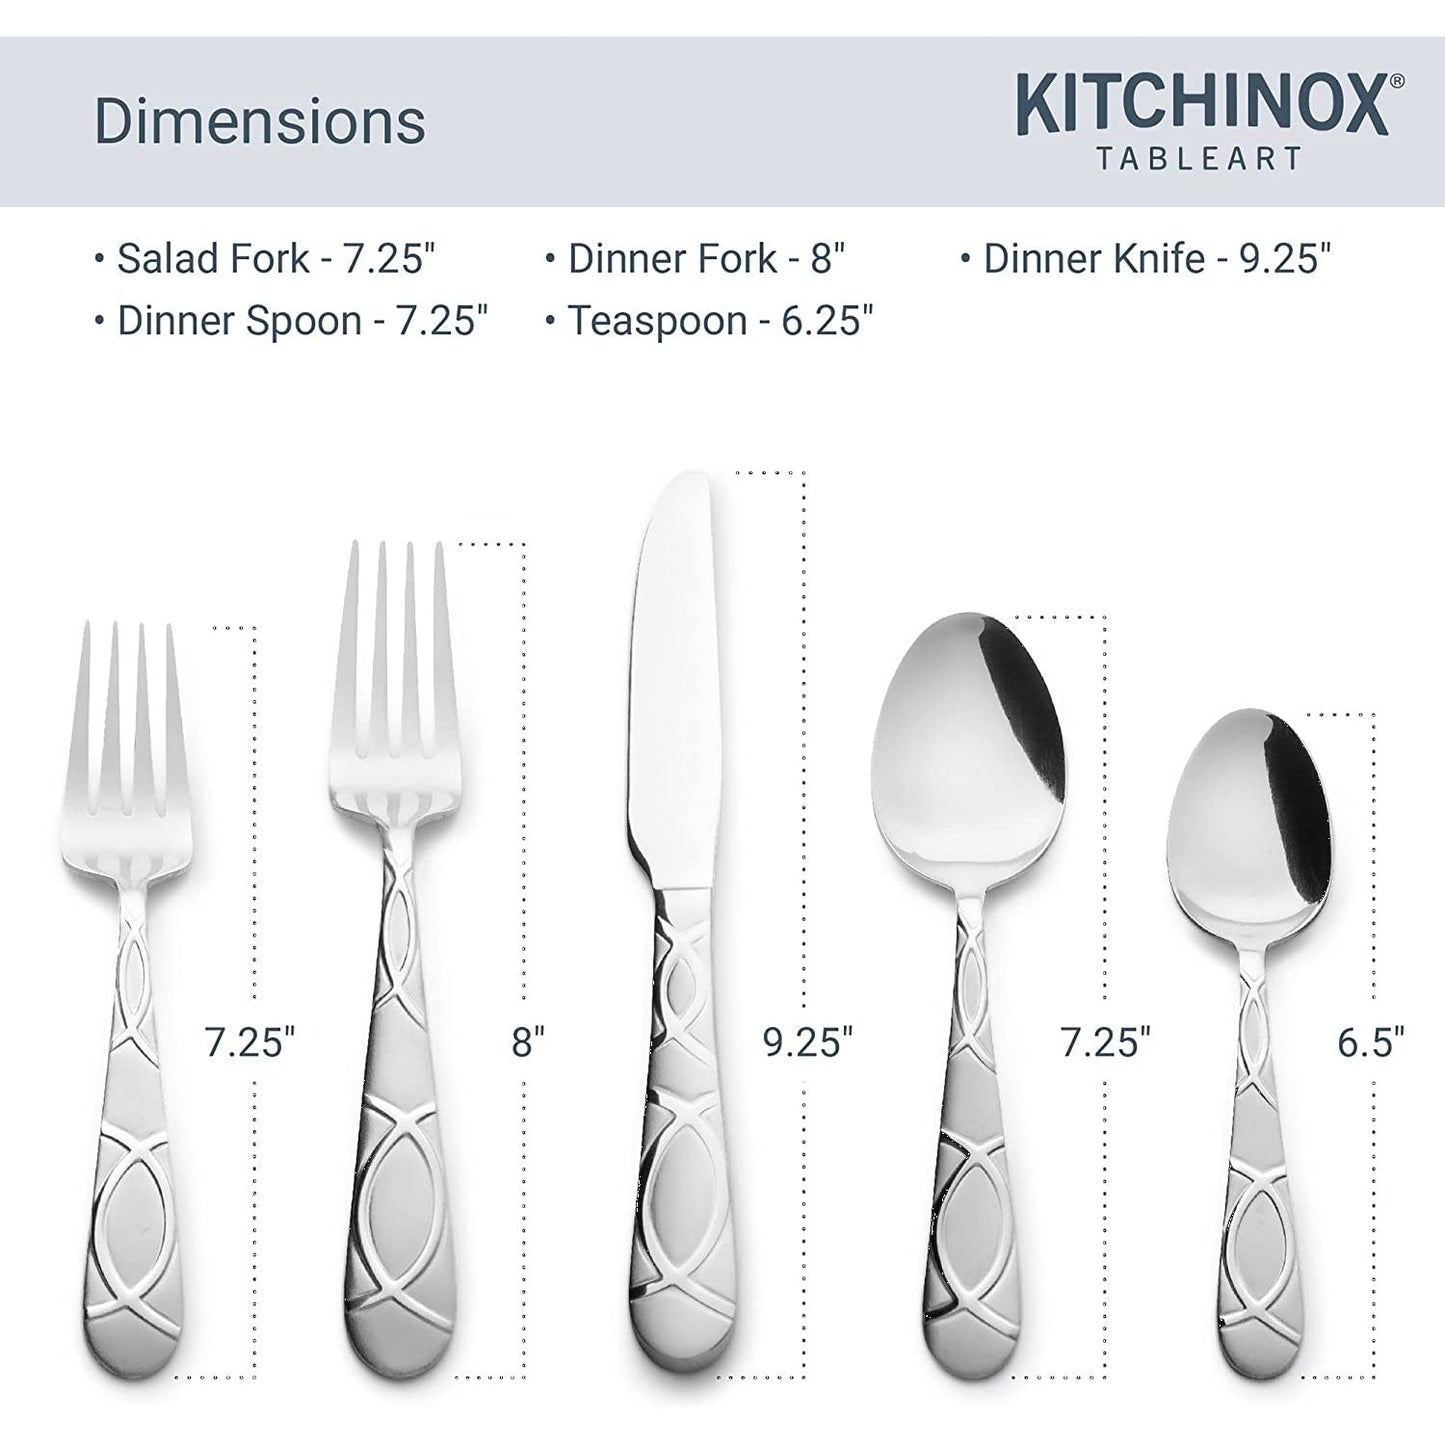 Kitchinox Lily Frost 20-Piece Flatware Service For 4